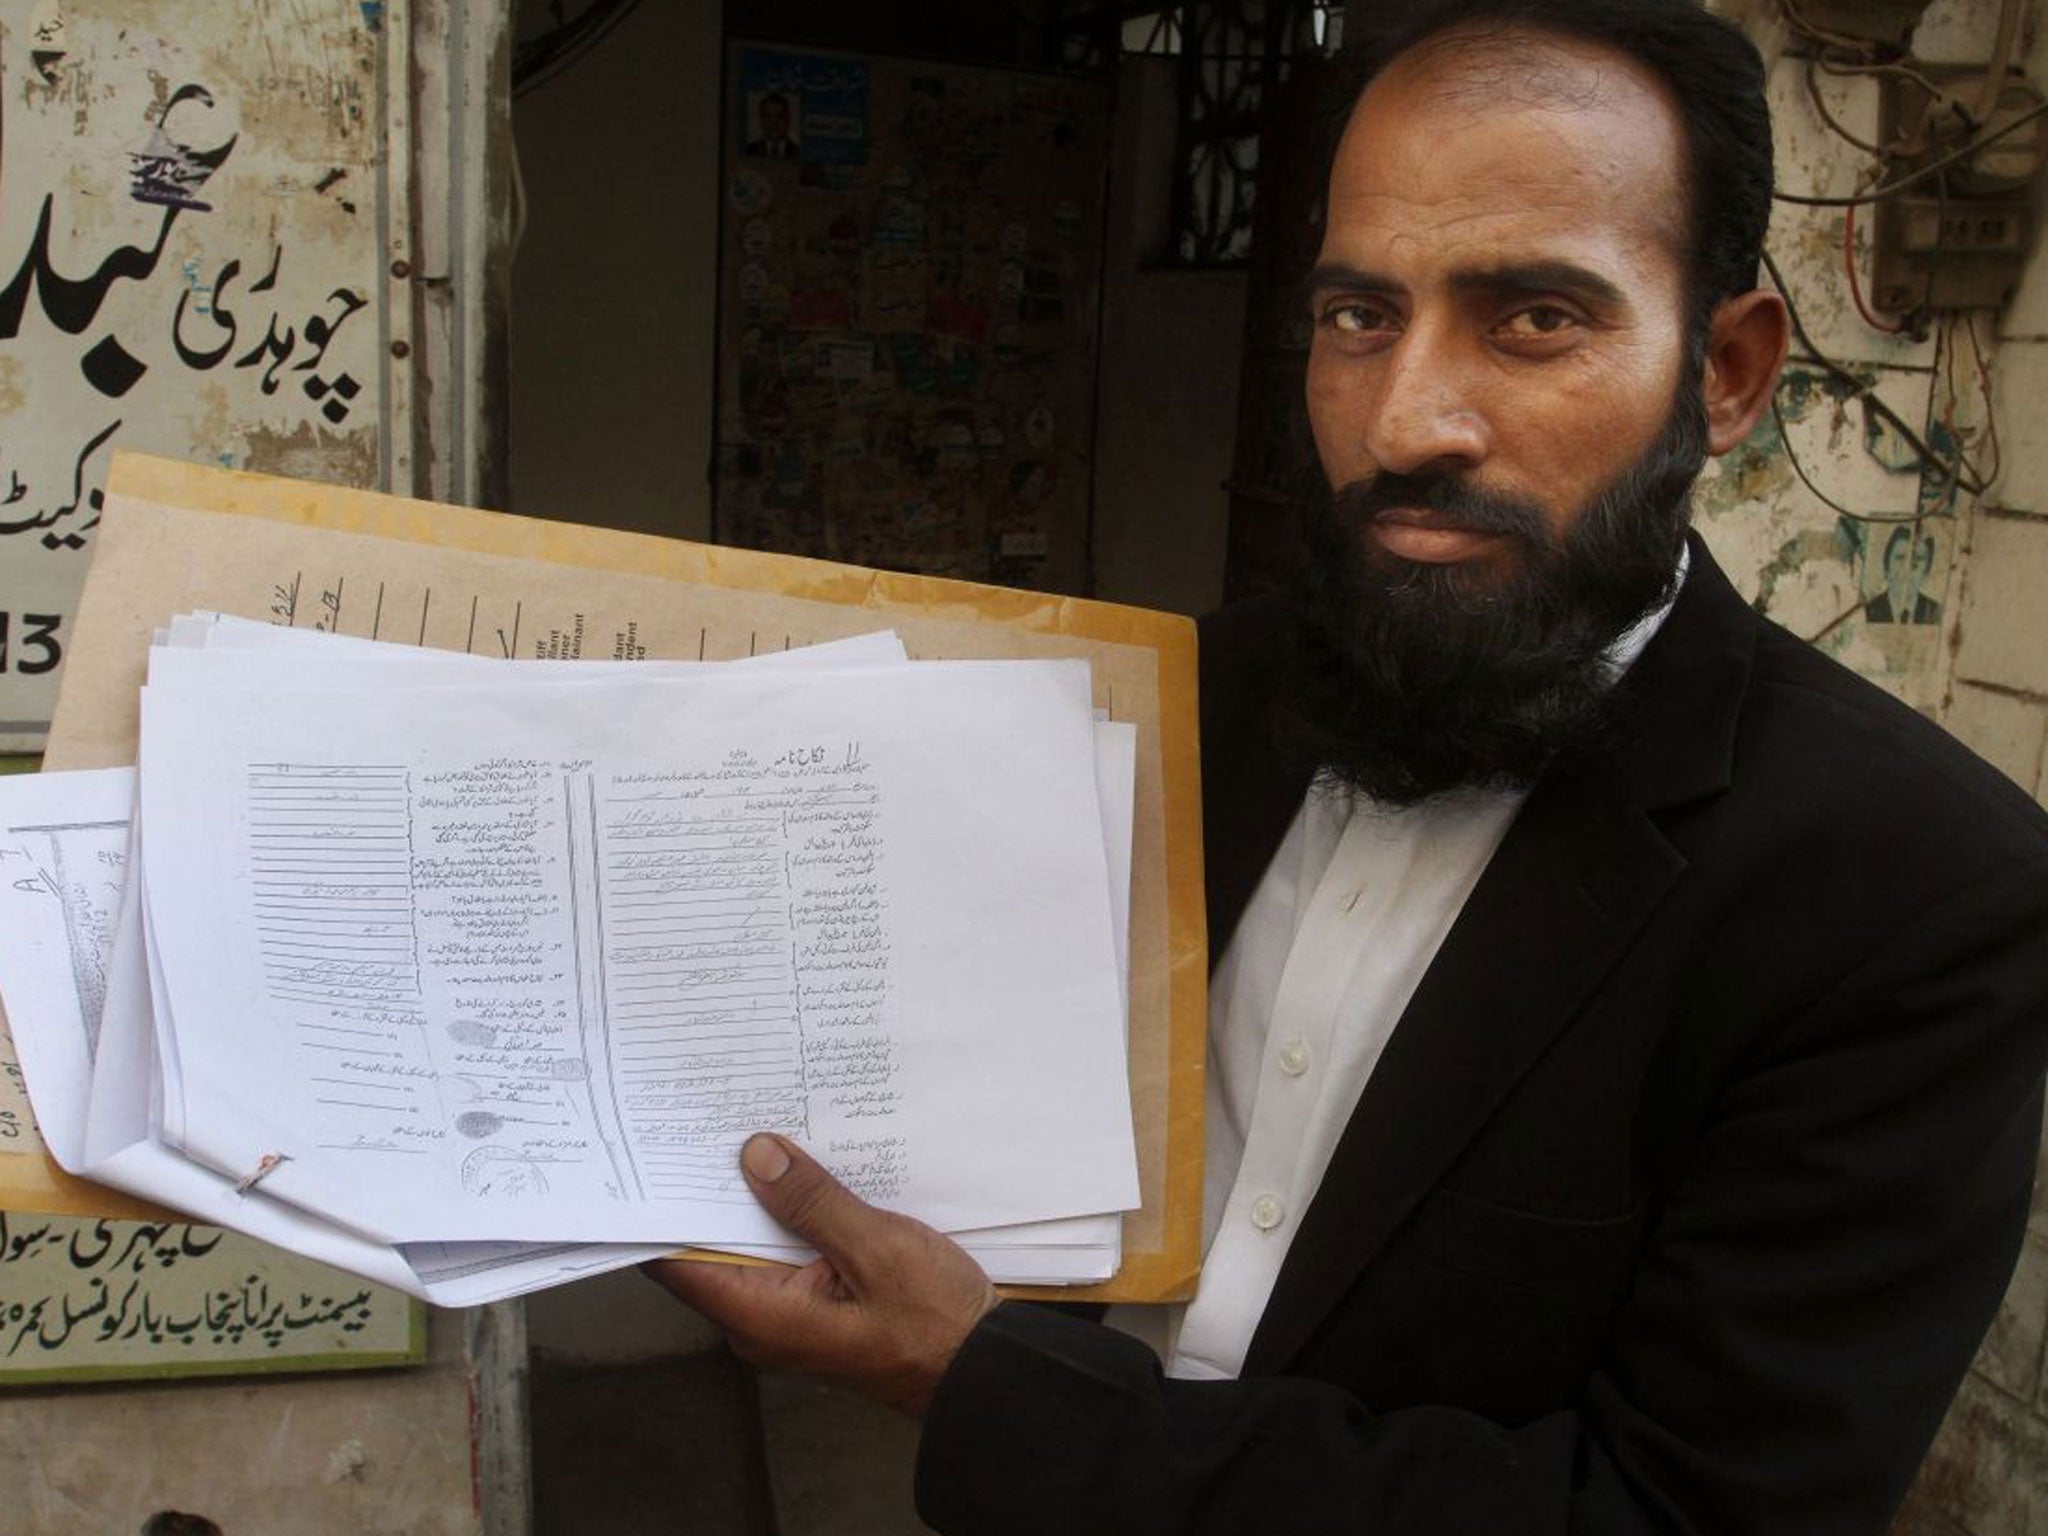 Mustafa Kharal, lawyer of pregnant woman Farzana Parveen who was stoned to death, shows her marriage certificate